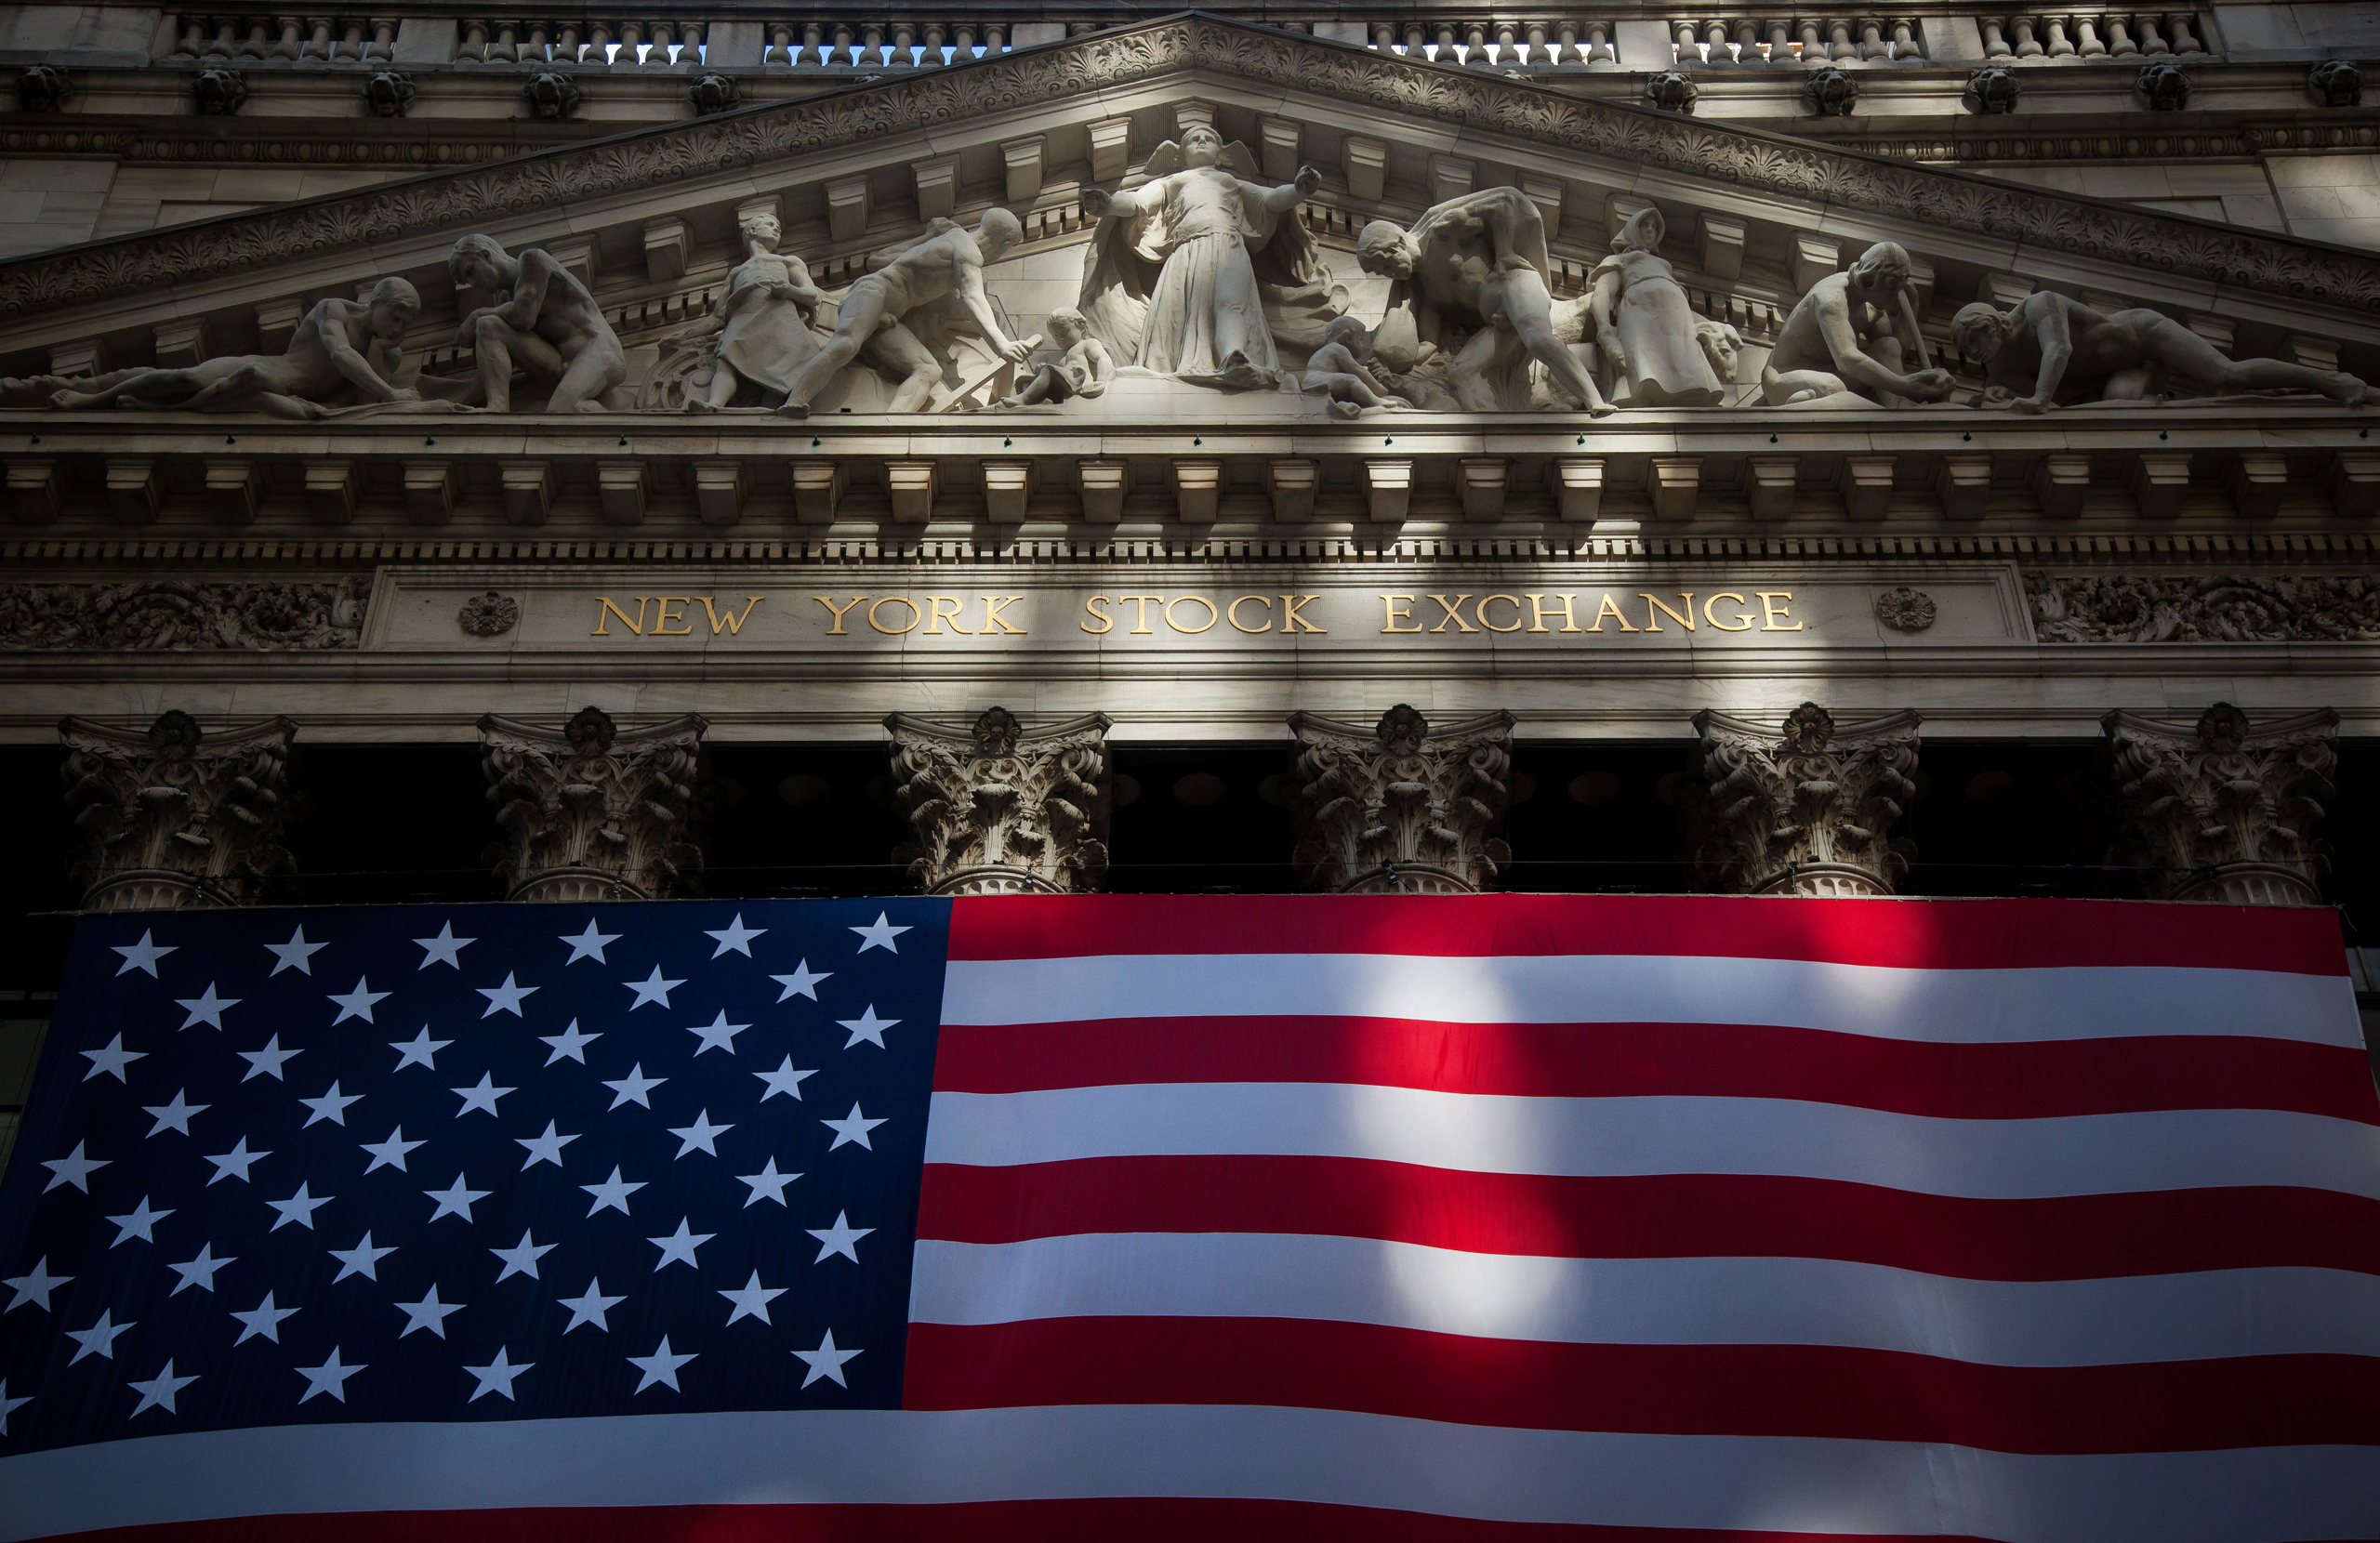 An American flag is displayed at the New York Stock Exchange (NYSE) in New York, U.S., on Nov. 11, 2016. (Michael Nagle—Bloomberg/Getty Images)